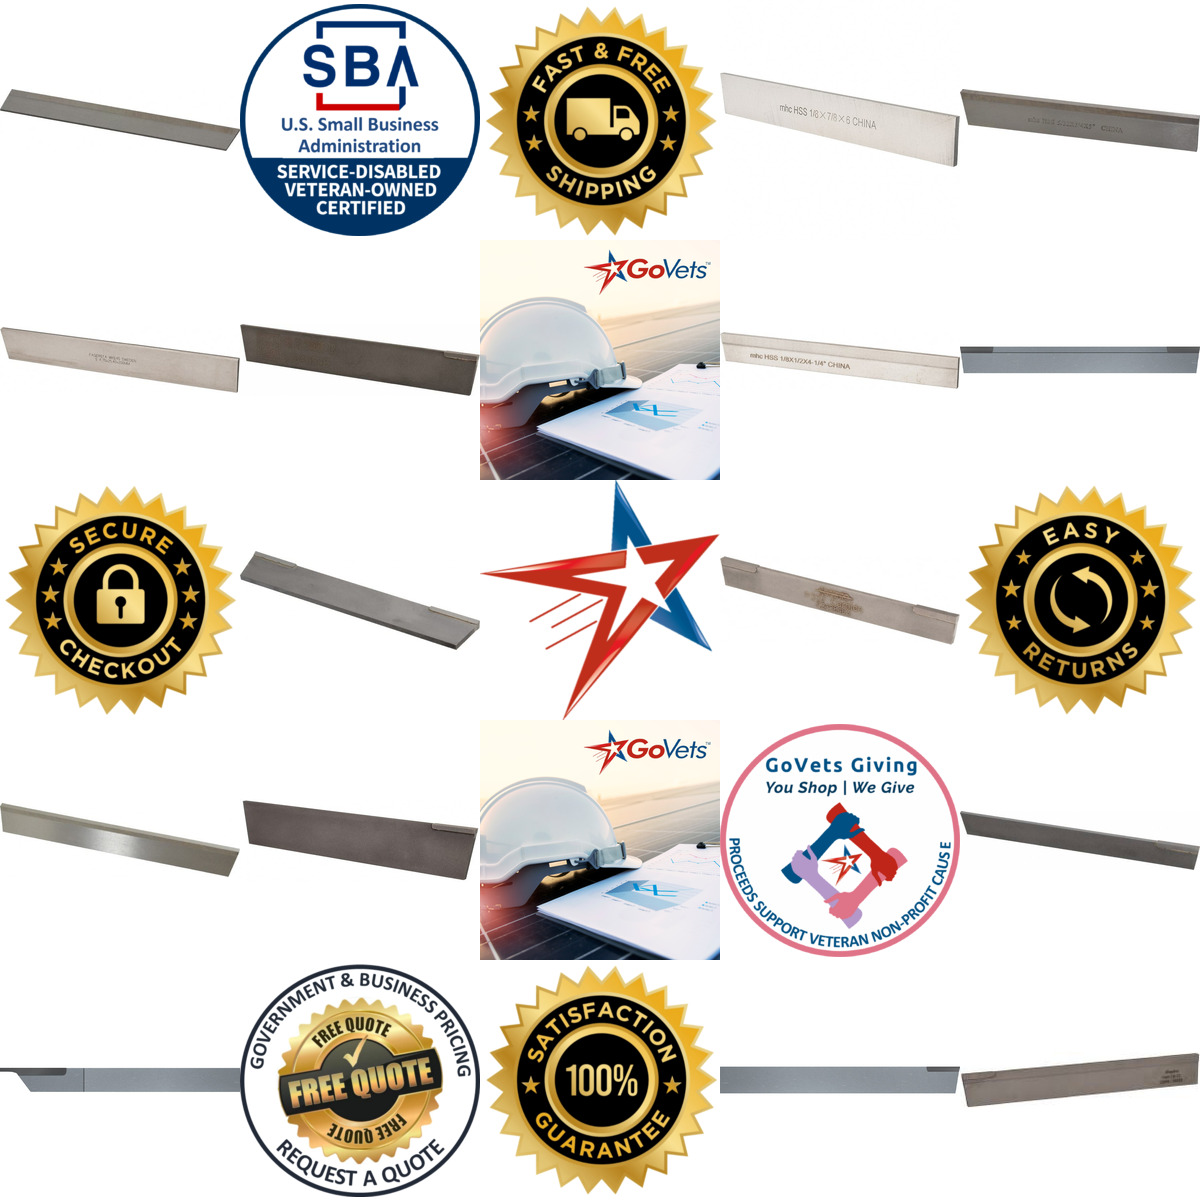 A selection of Cut Off Blades products on GoVets